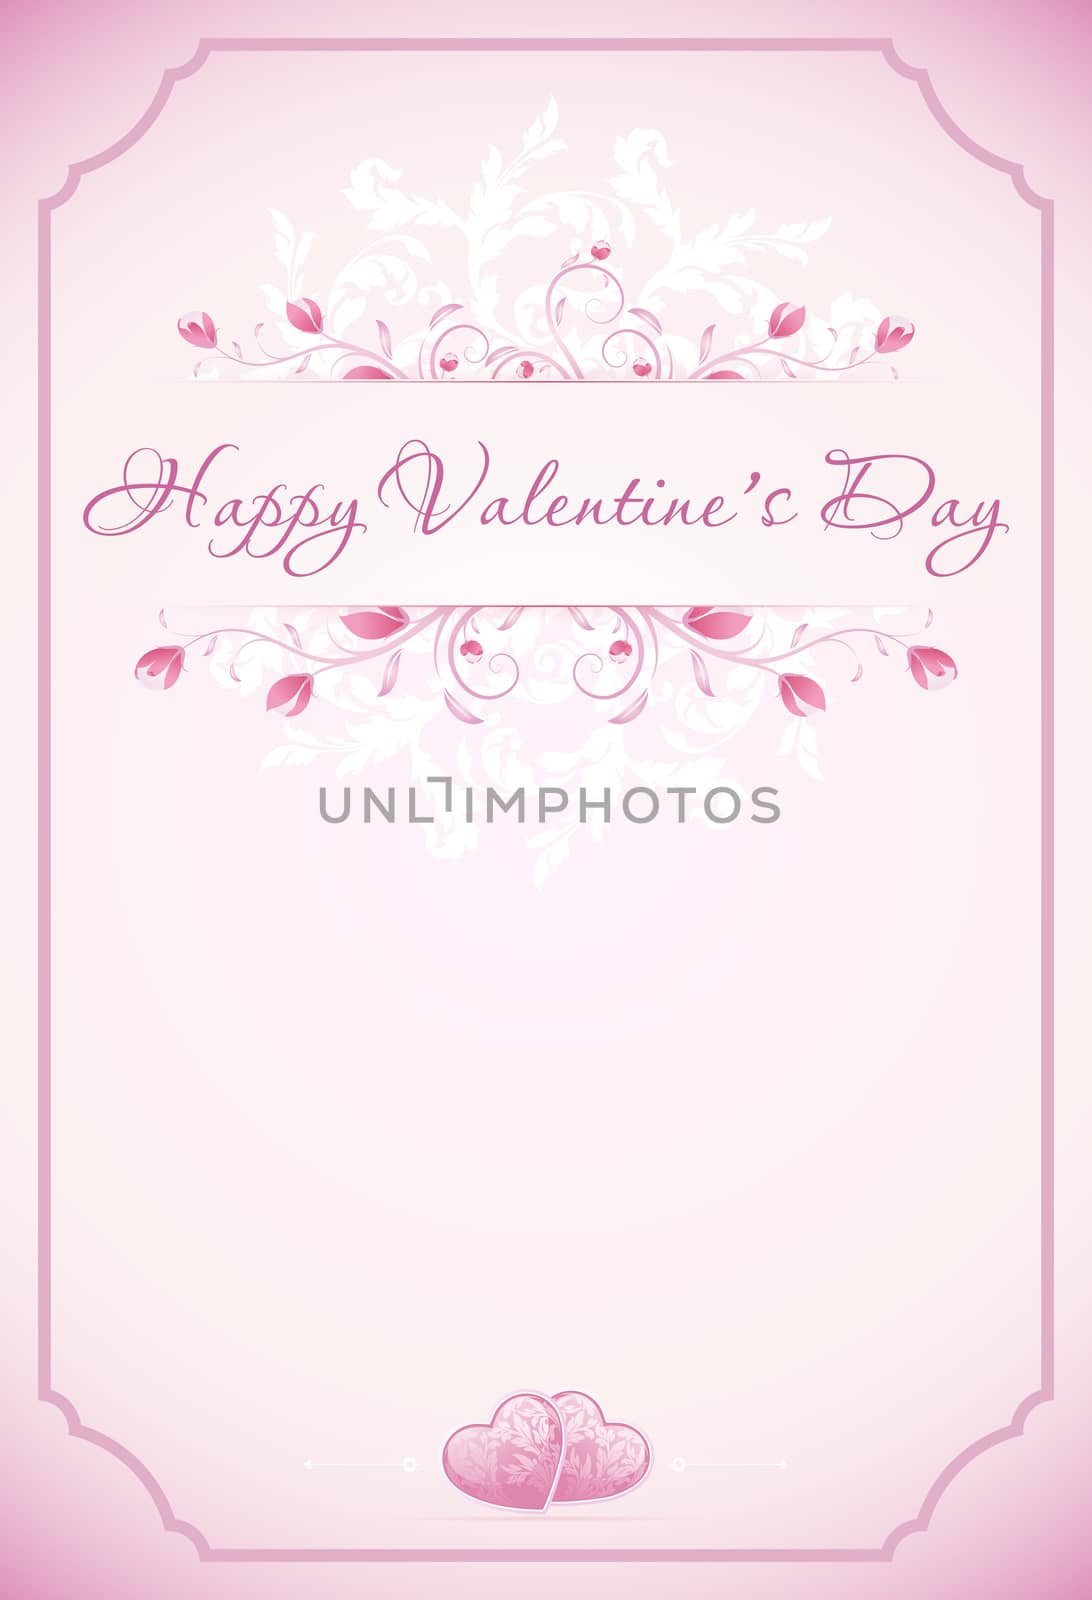 Happy Valentines Day Card with ornament, hearts, flowers, frame and arrow in pink color